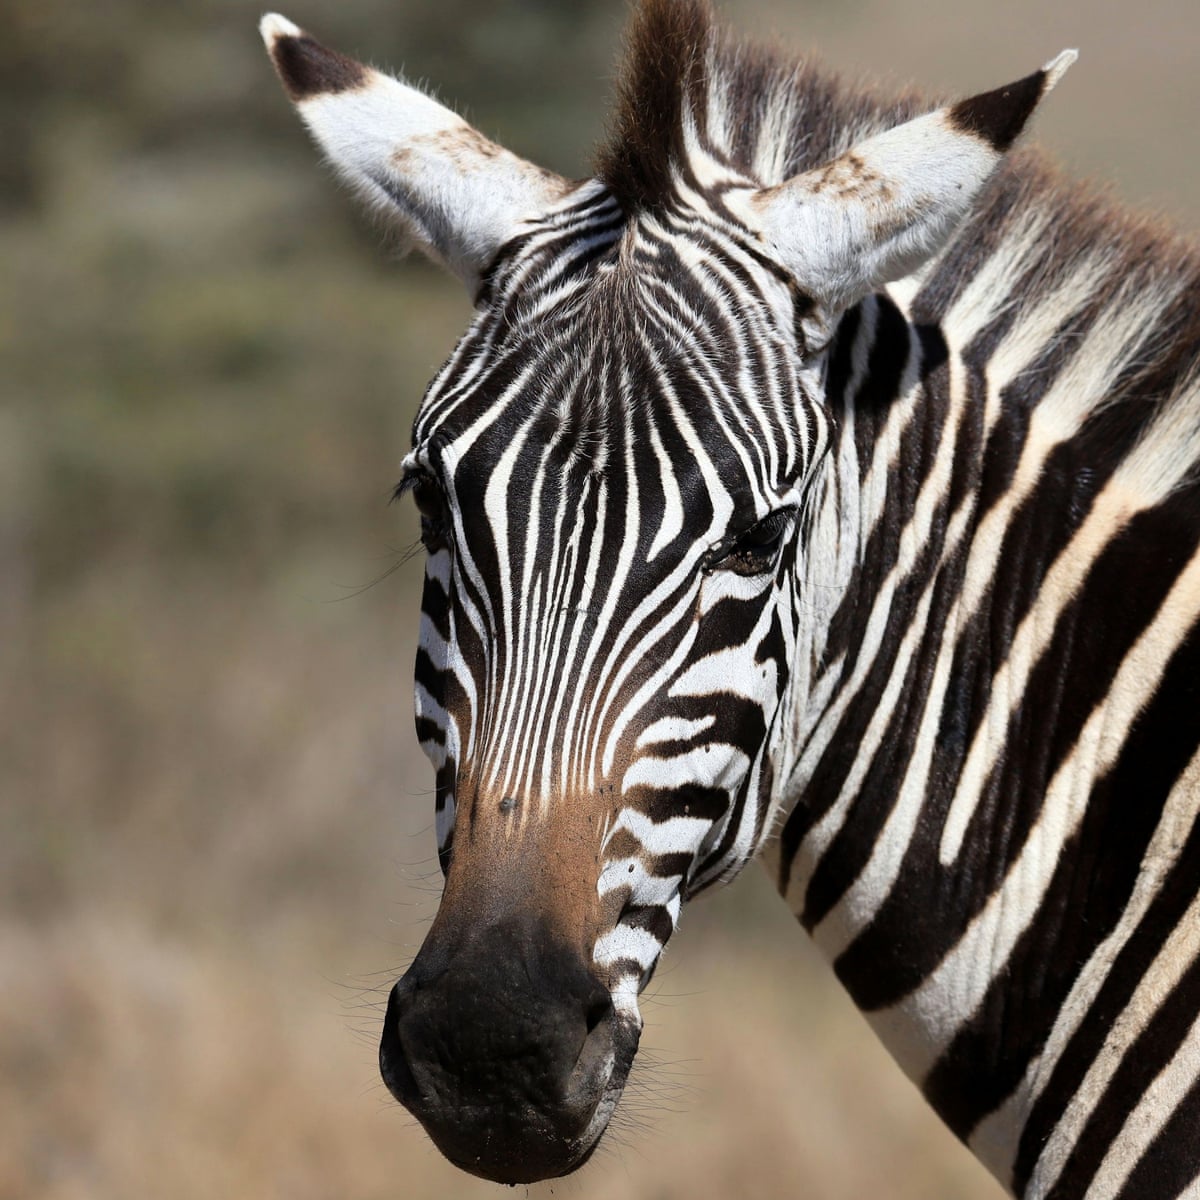 Craziest thing': Police use Taser on escaped zebra in Tennessee | Tennessee  | The Guardian